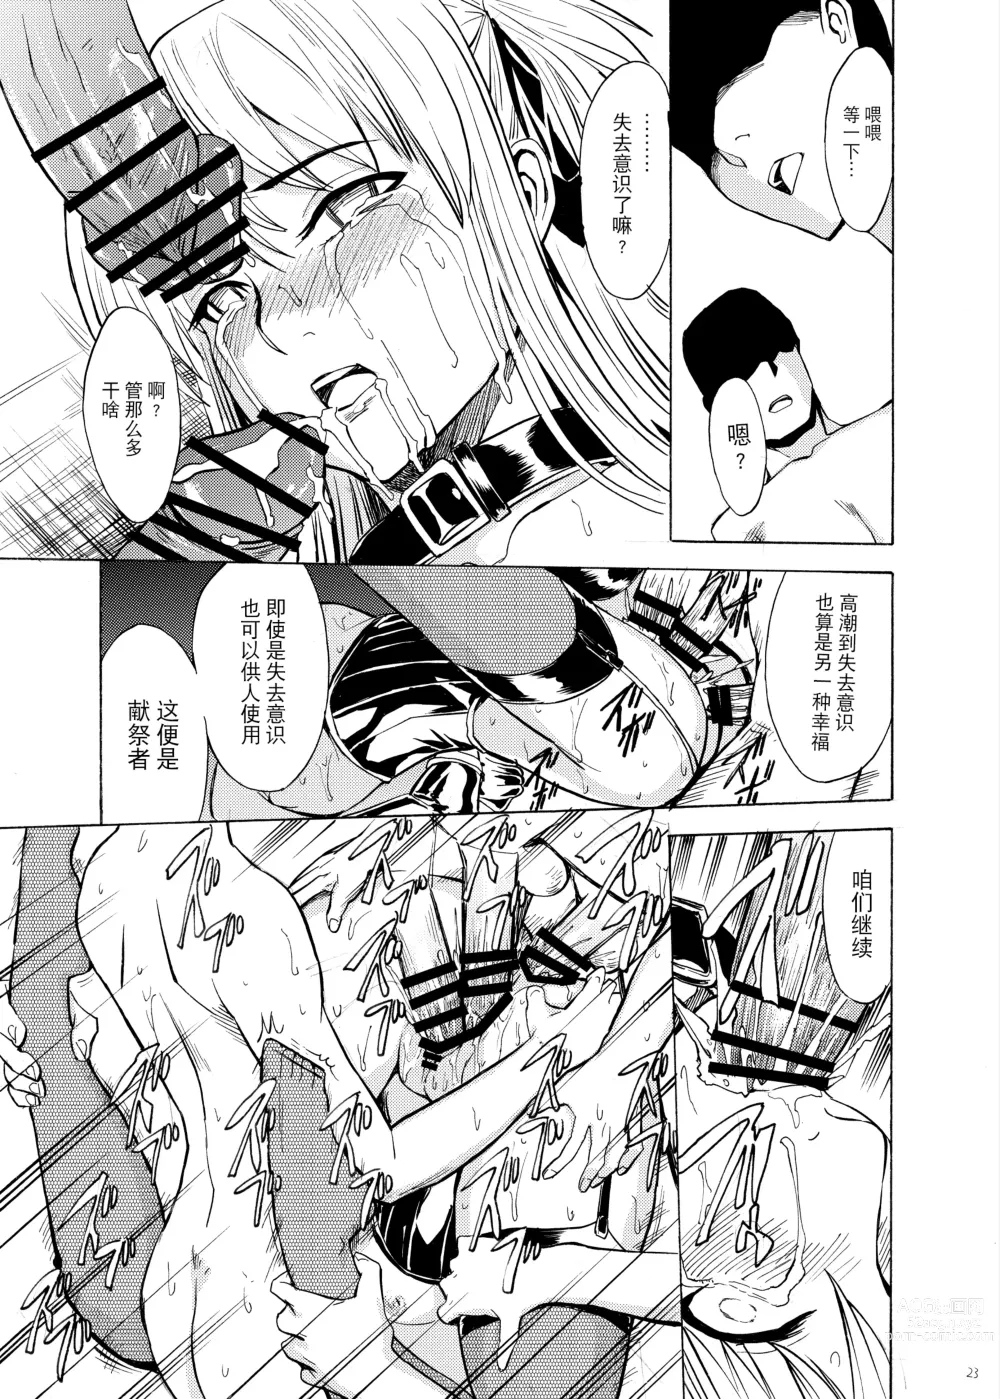 Page 23 of doujinshi  魔法学园的幕后 献祭者育成计划